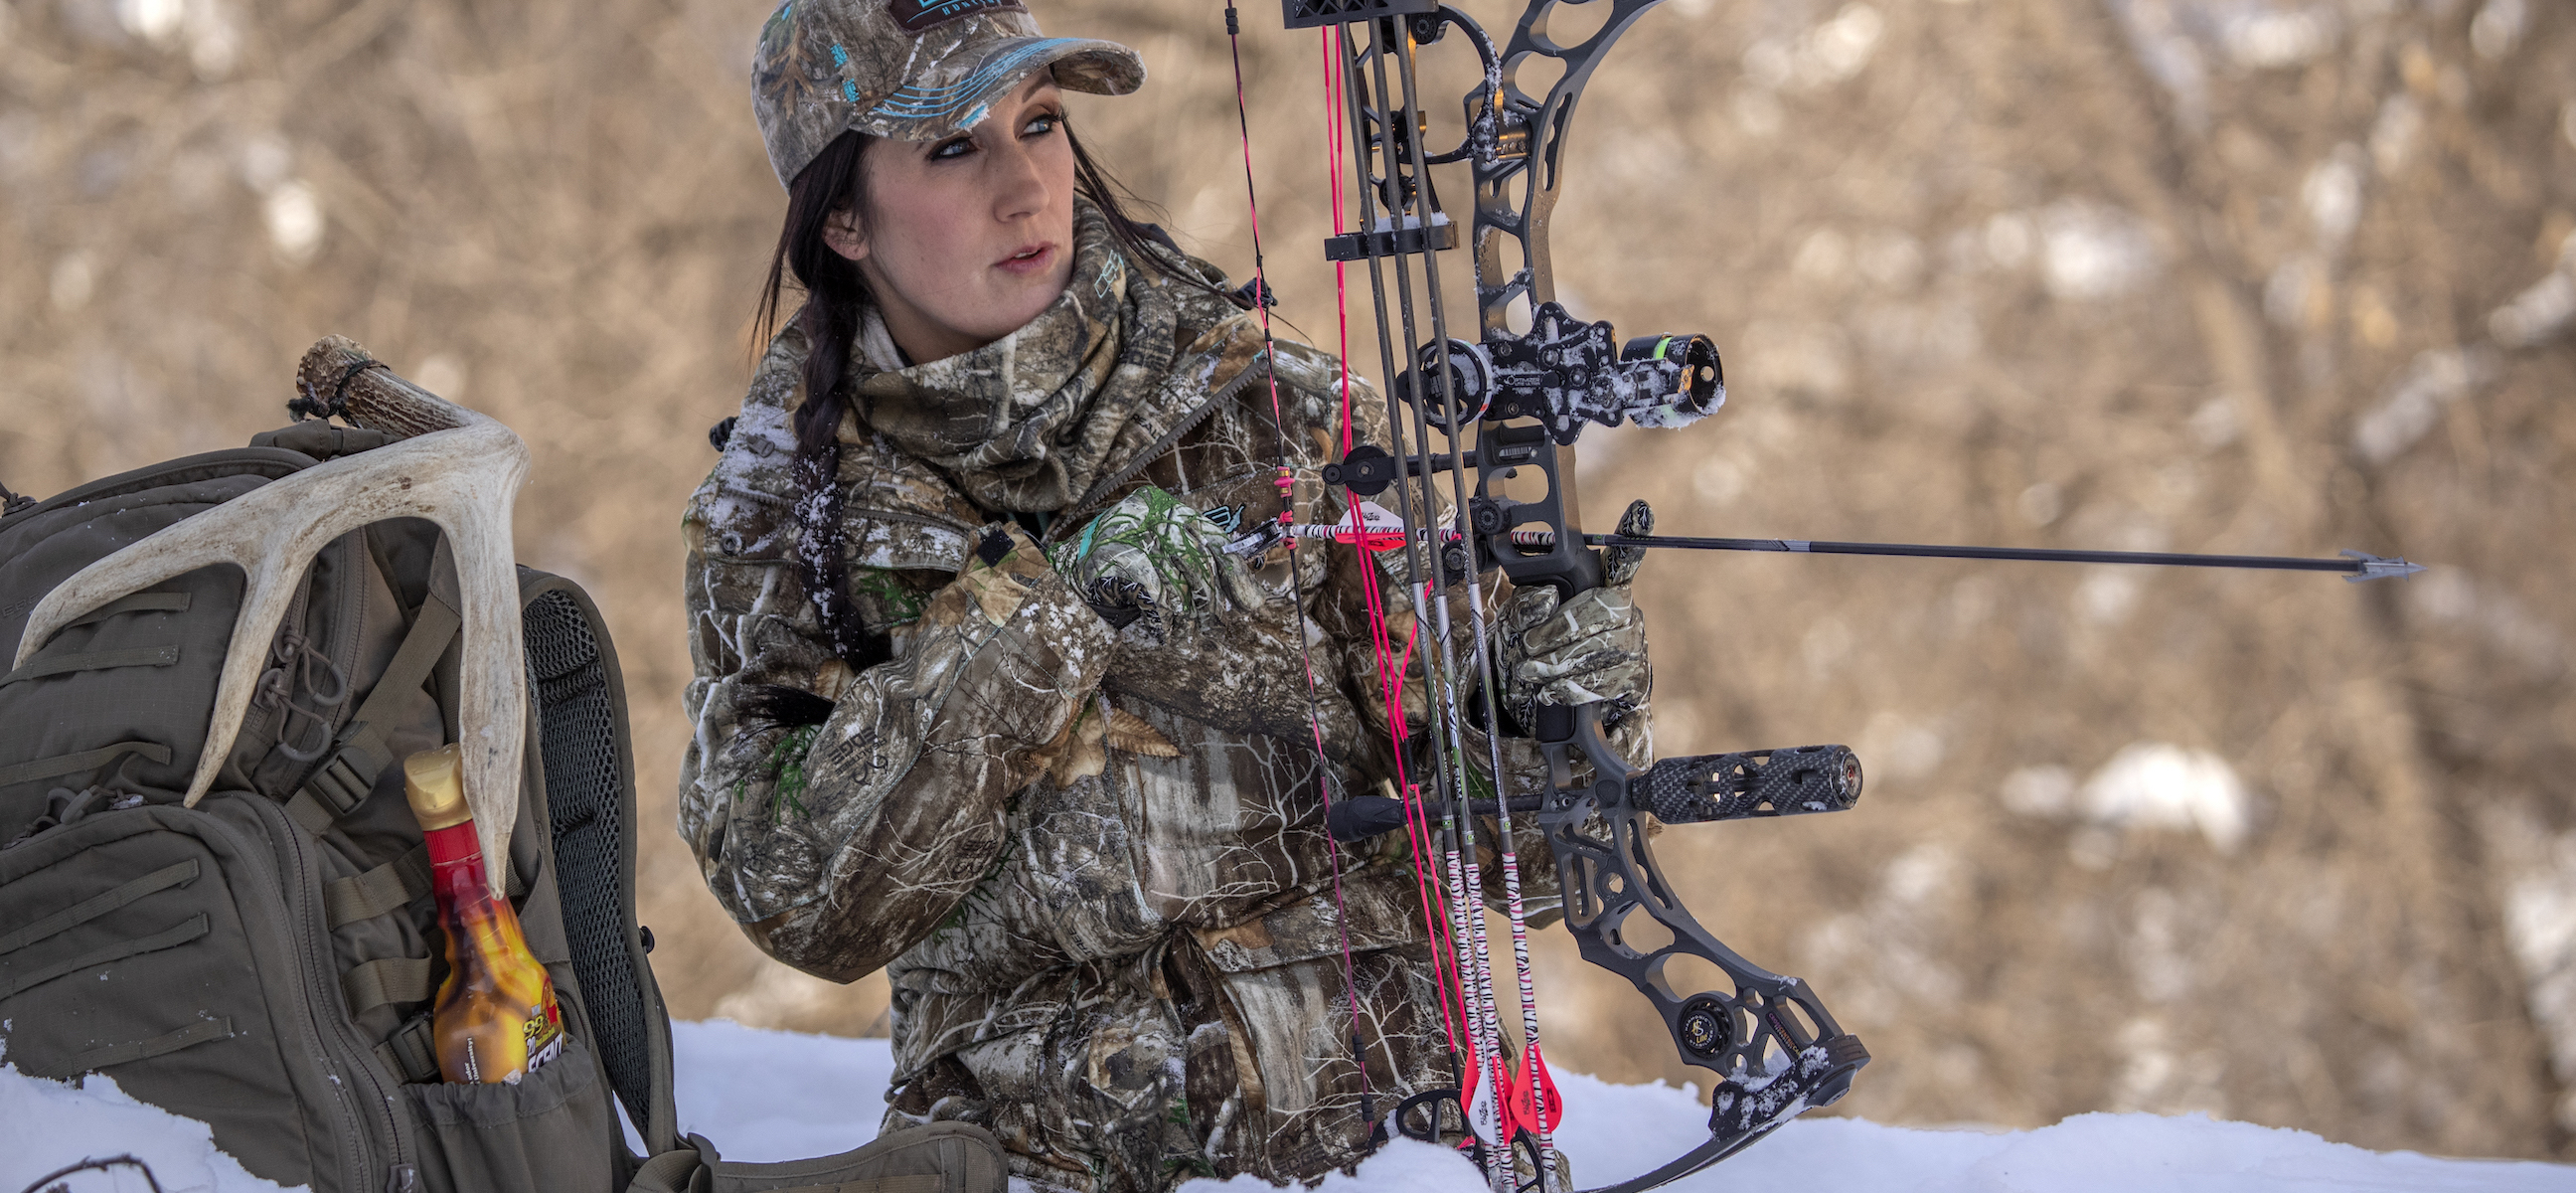 These tips can lead to successful late-season deer hunting